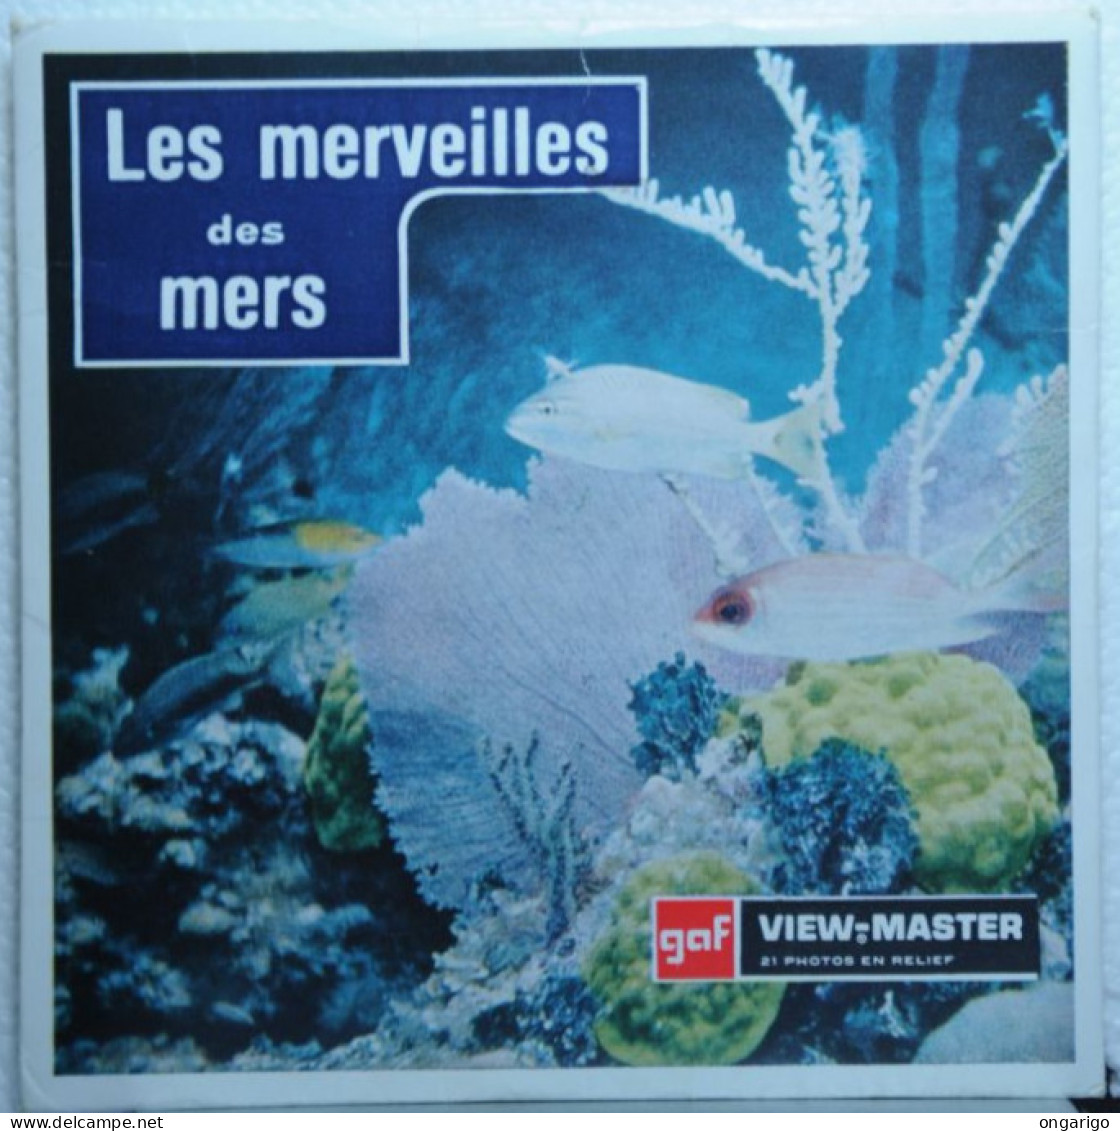 VIEW MASTER  ;  B 612   MERVEILLES SOUS-MARINES   :  POCHETTE DE 3 DISQUES - Stereoscopes - Side-by-side Viewers